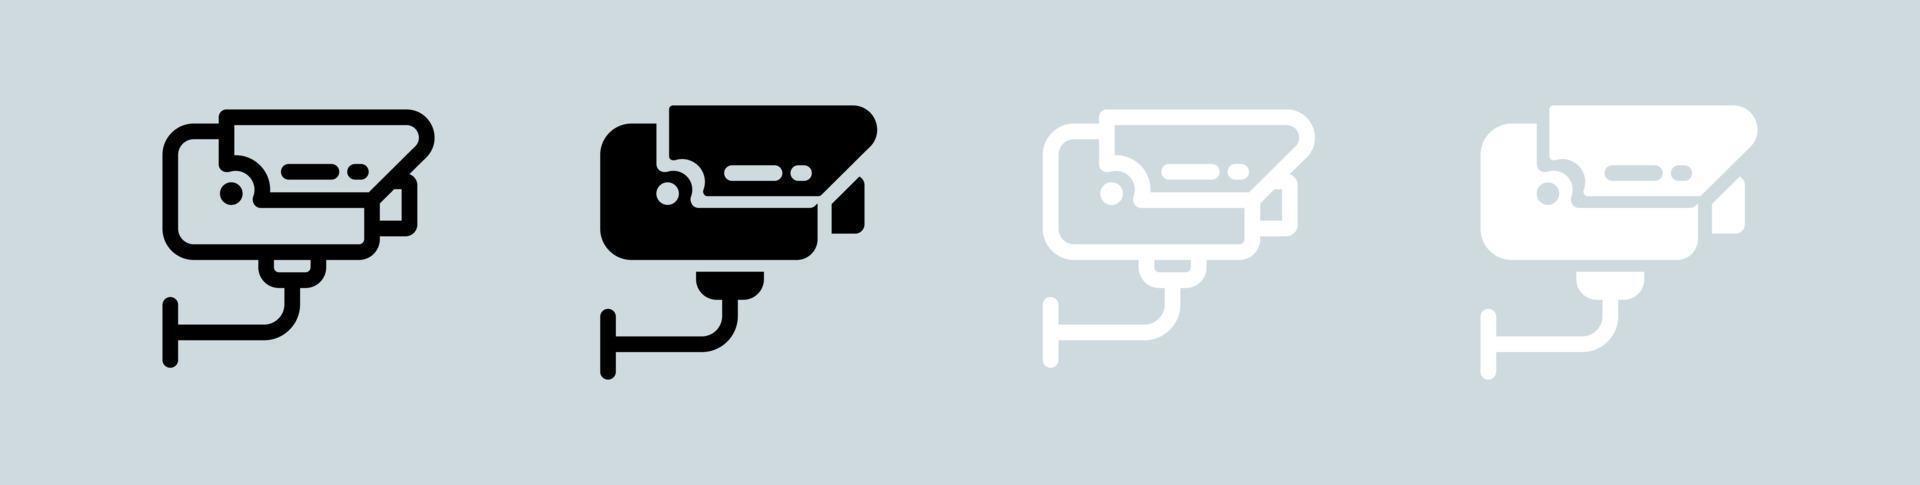 Cctv icon set in black and white. Security camera signs vector illustration.